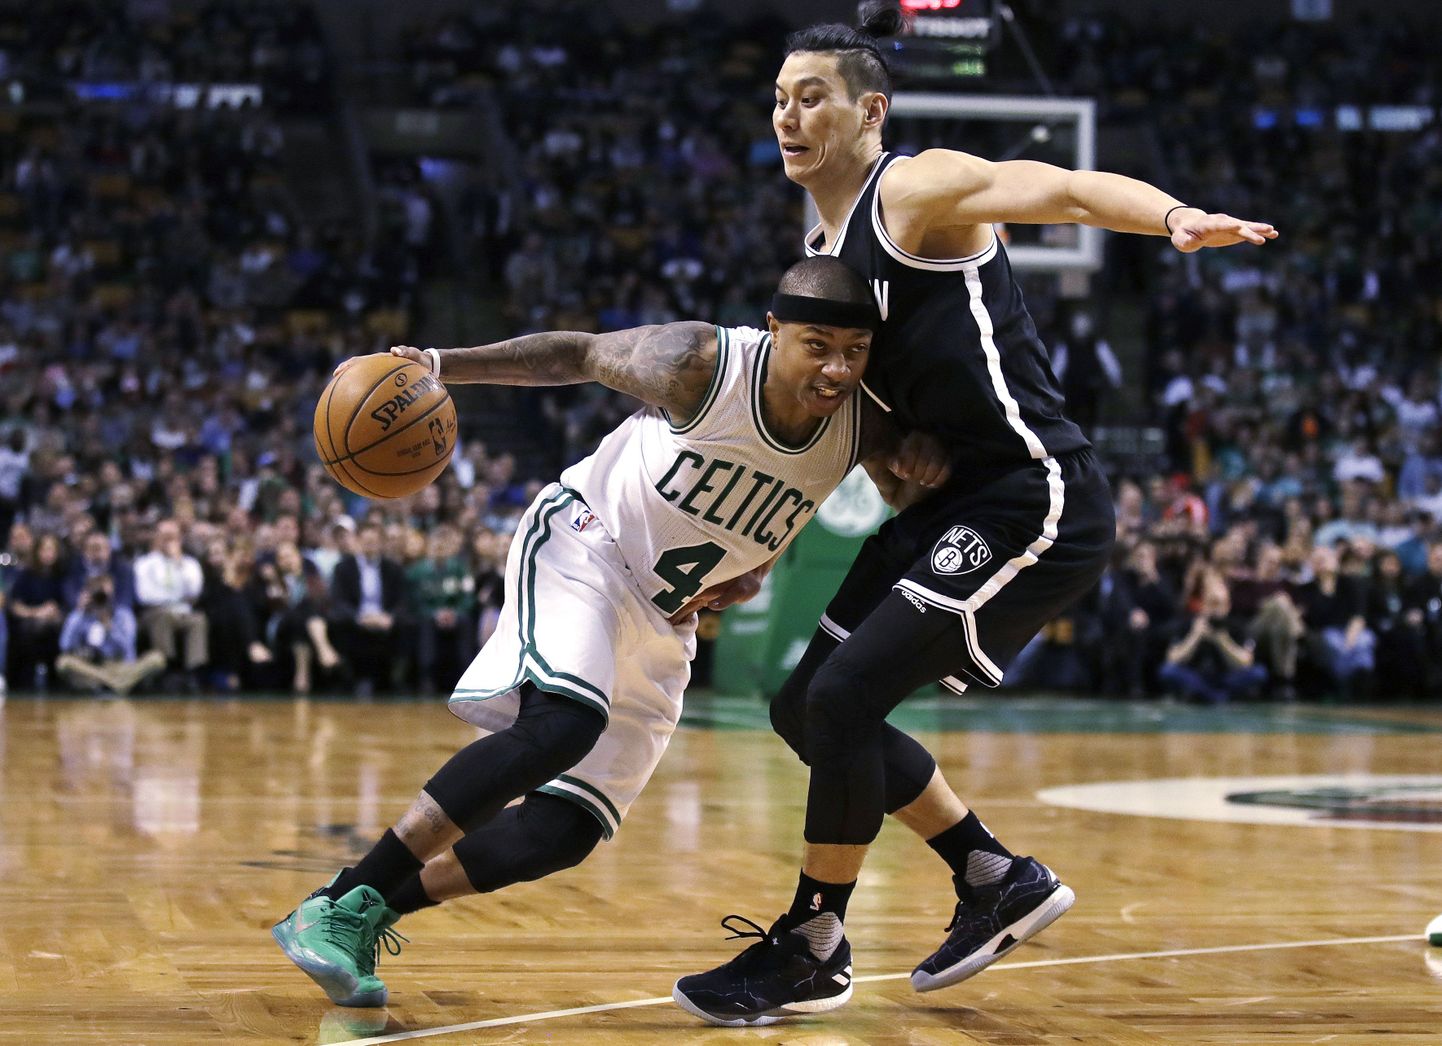 Boston Celtics guard Isaiah Thomas (4) tries to drive past Brooklyn Nets guard Jeremy Lin (7) during the second half of an NBA basketball game in Boston, Monday, April 10, 2017. Thomas scored 27 points as the Celtics defeated the Nets 114-105. (AP Photo/Charles Krupa)